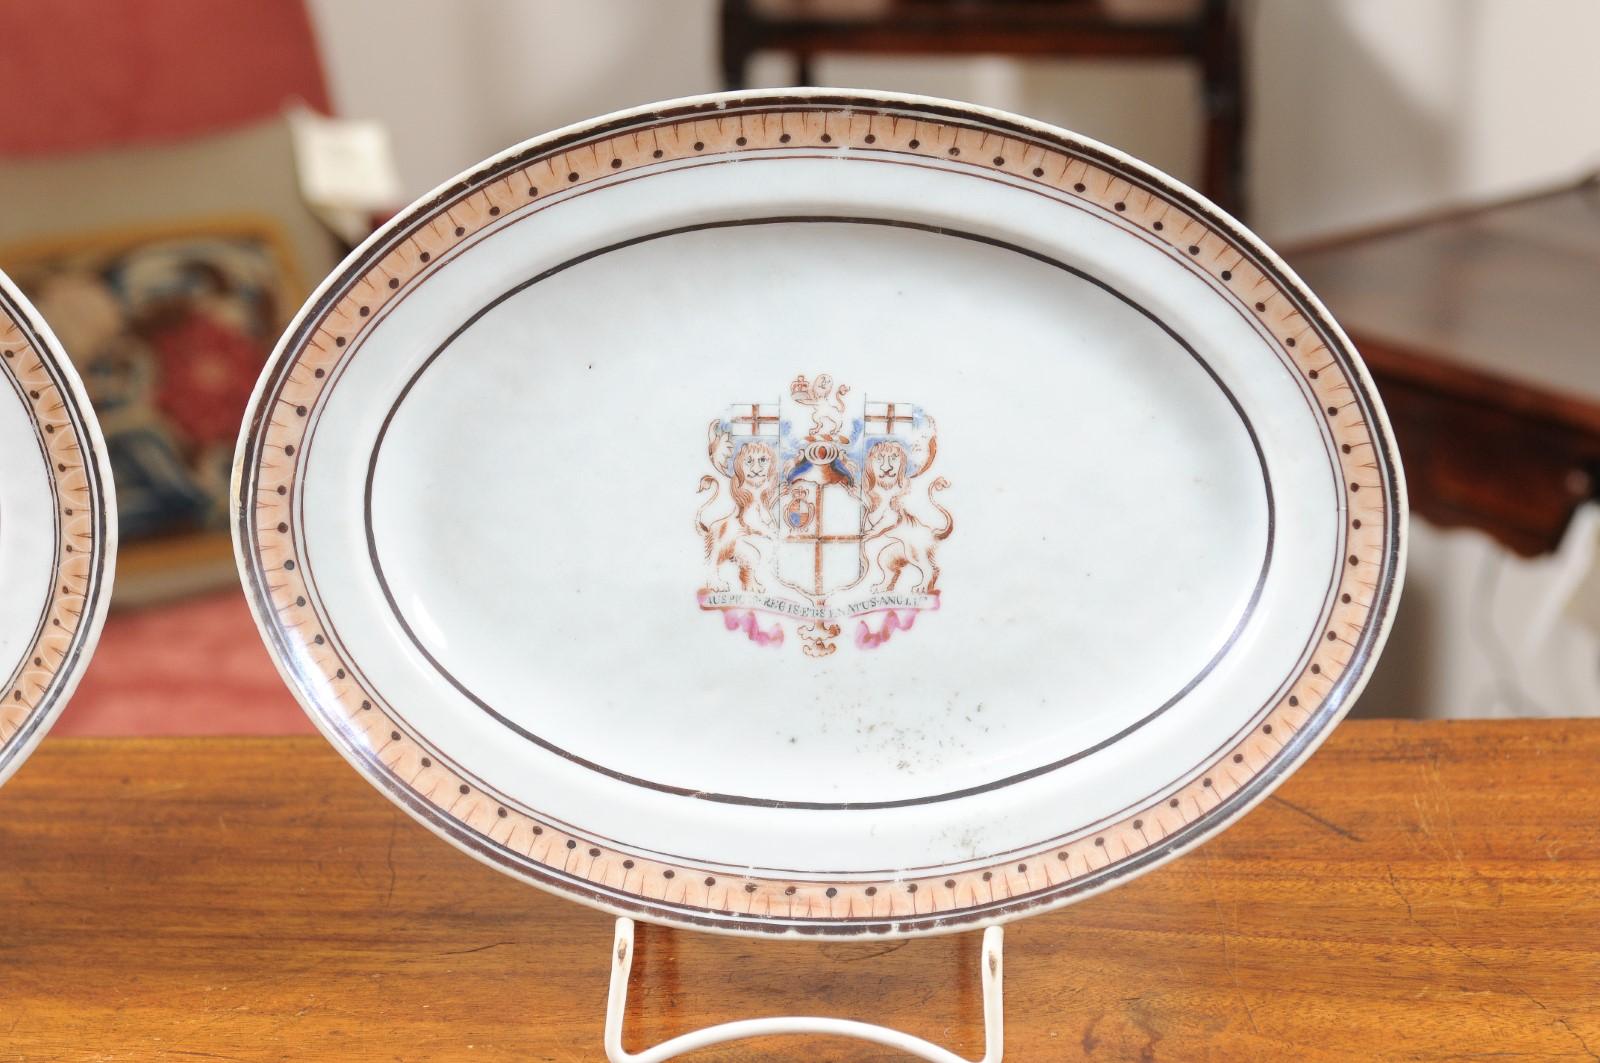 Pair of 18th Century Chinese Export Porcelain Platters with Armorial Crests For Sale 1